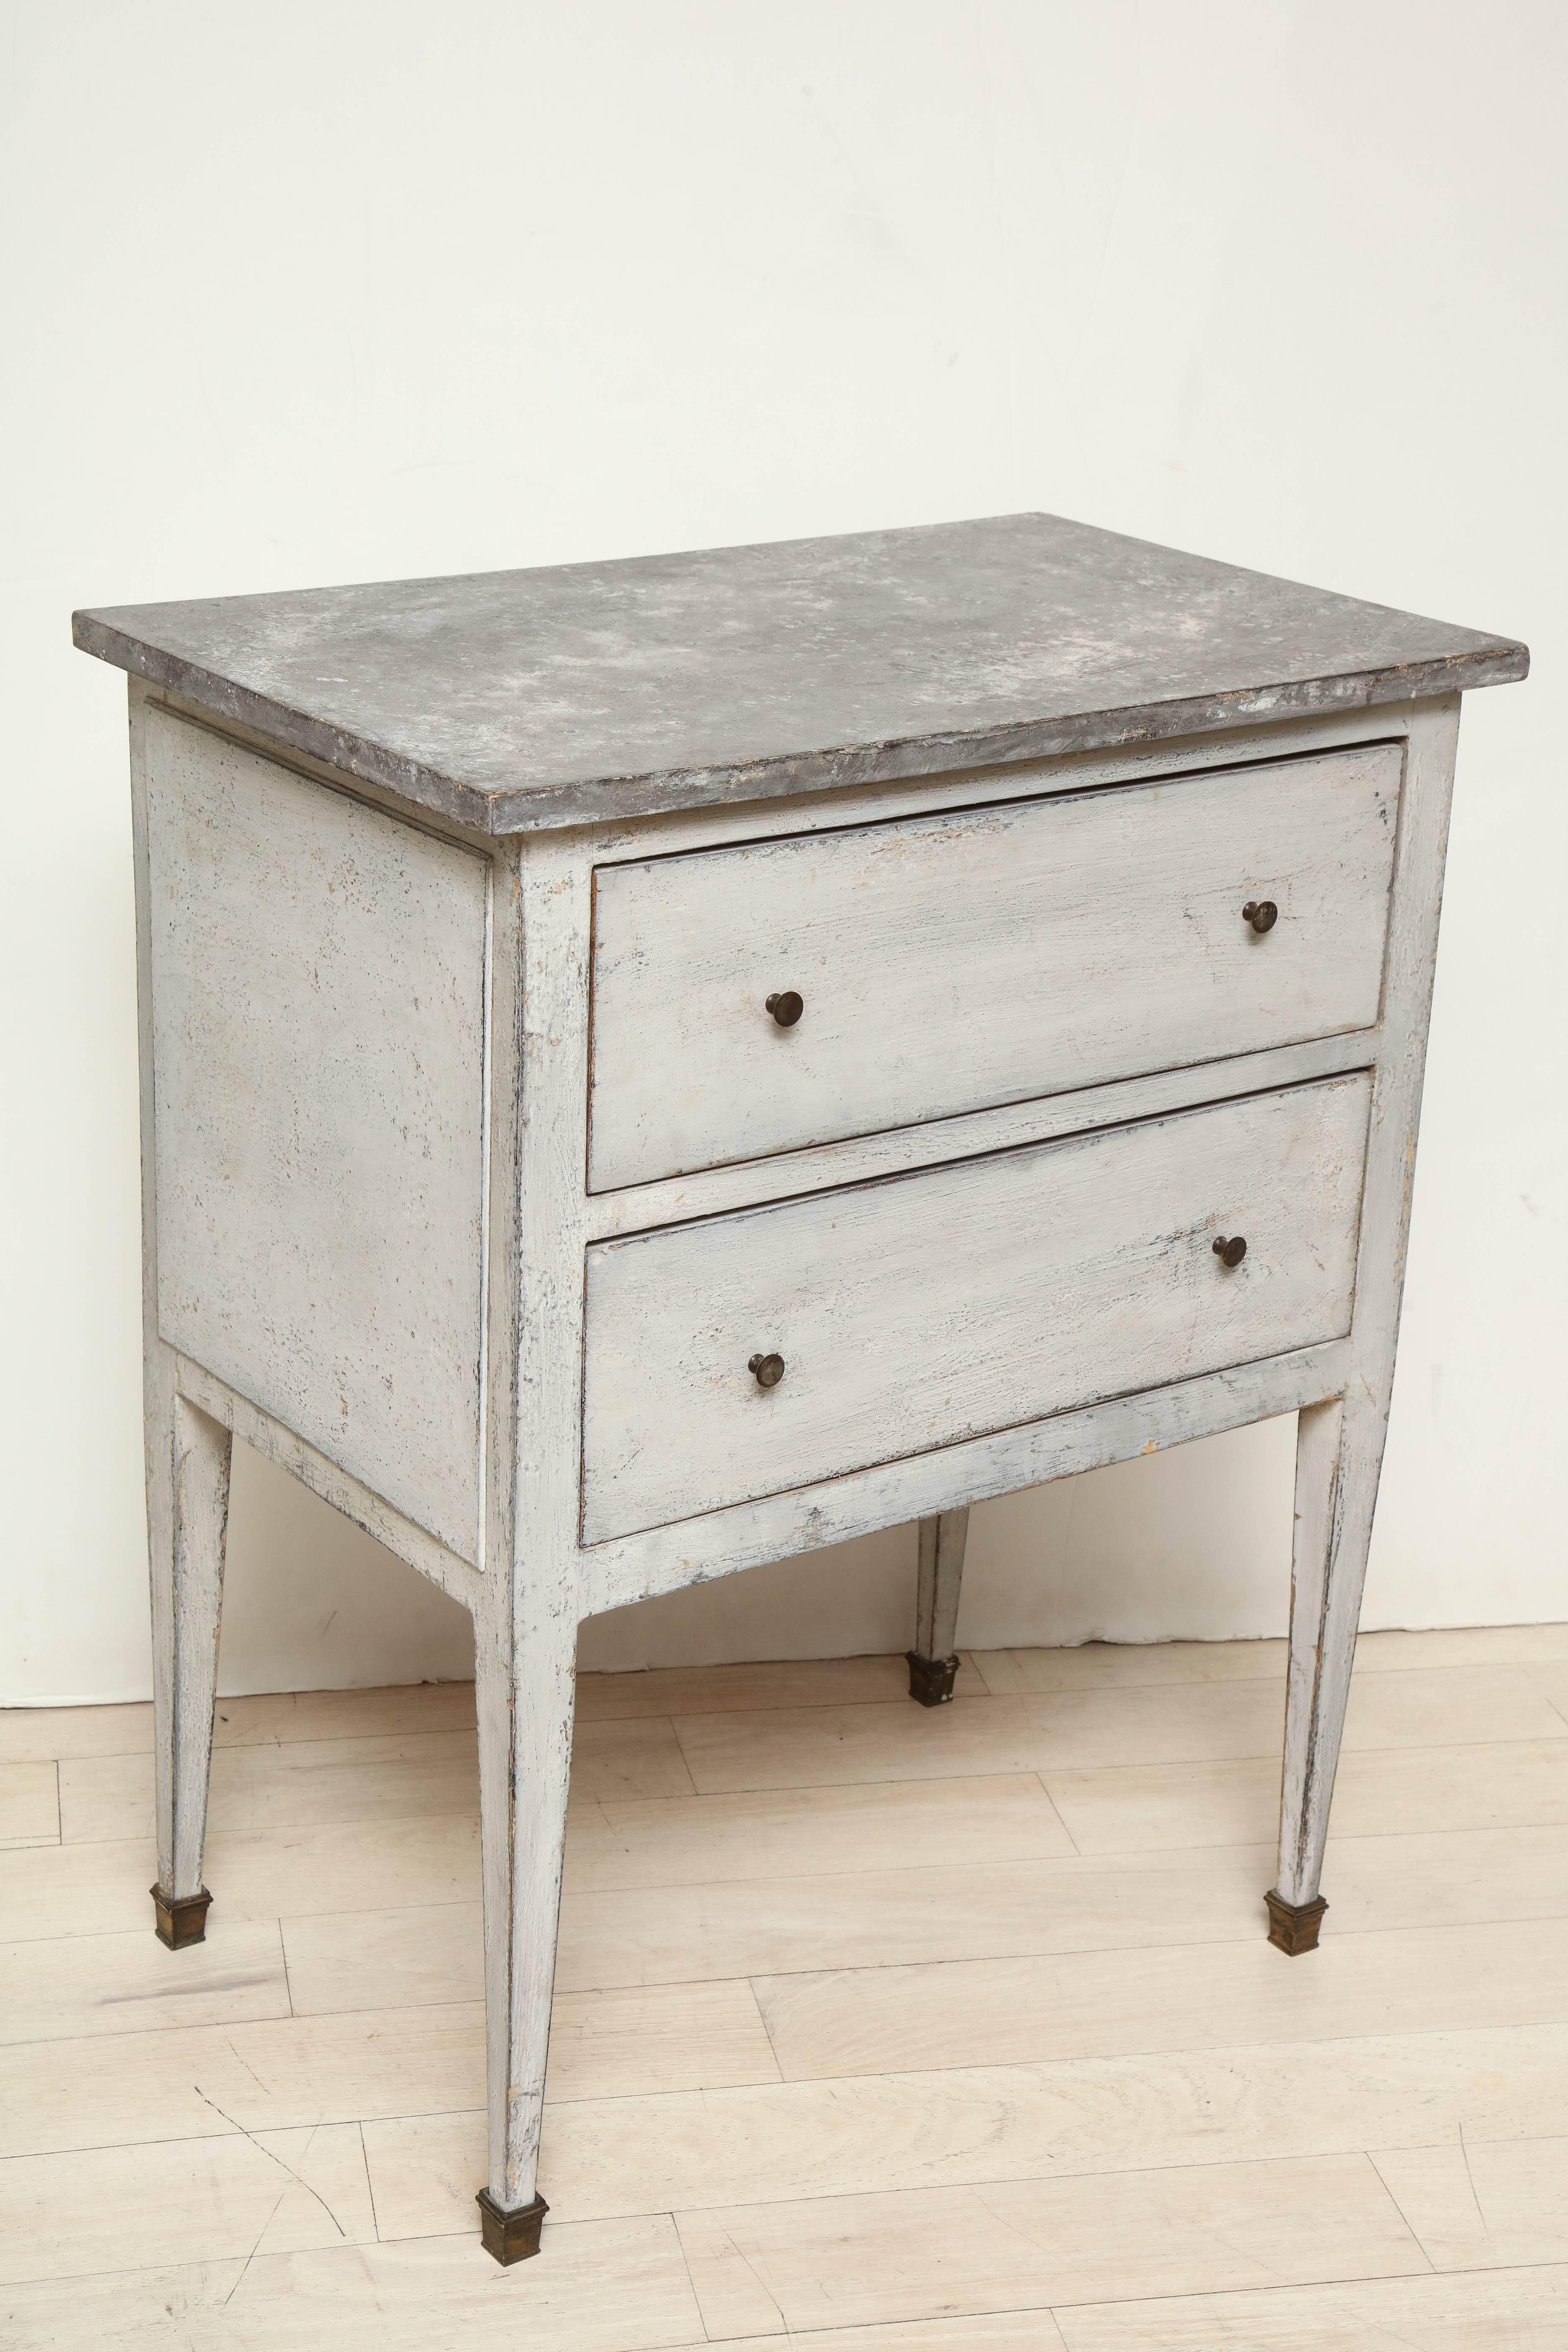 Small white painted two-drawer nightstand or side table with a faux bluestone top and brass sabots.